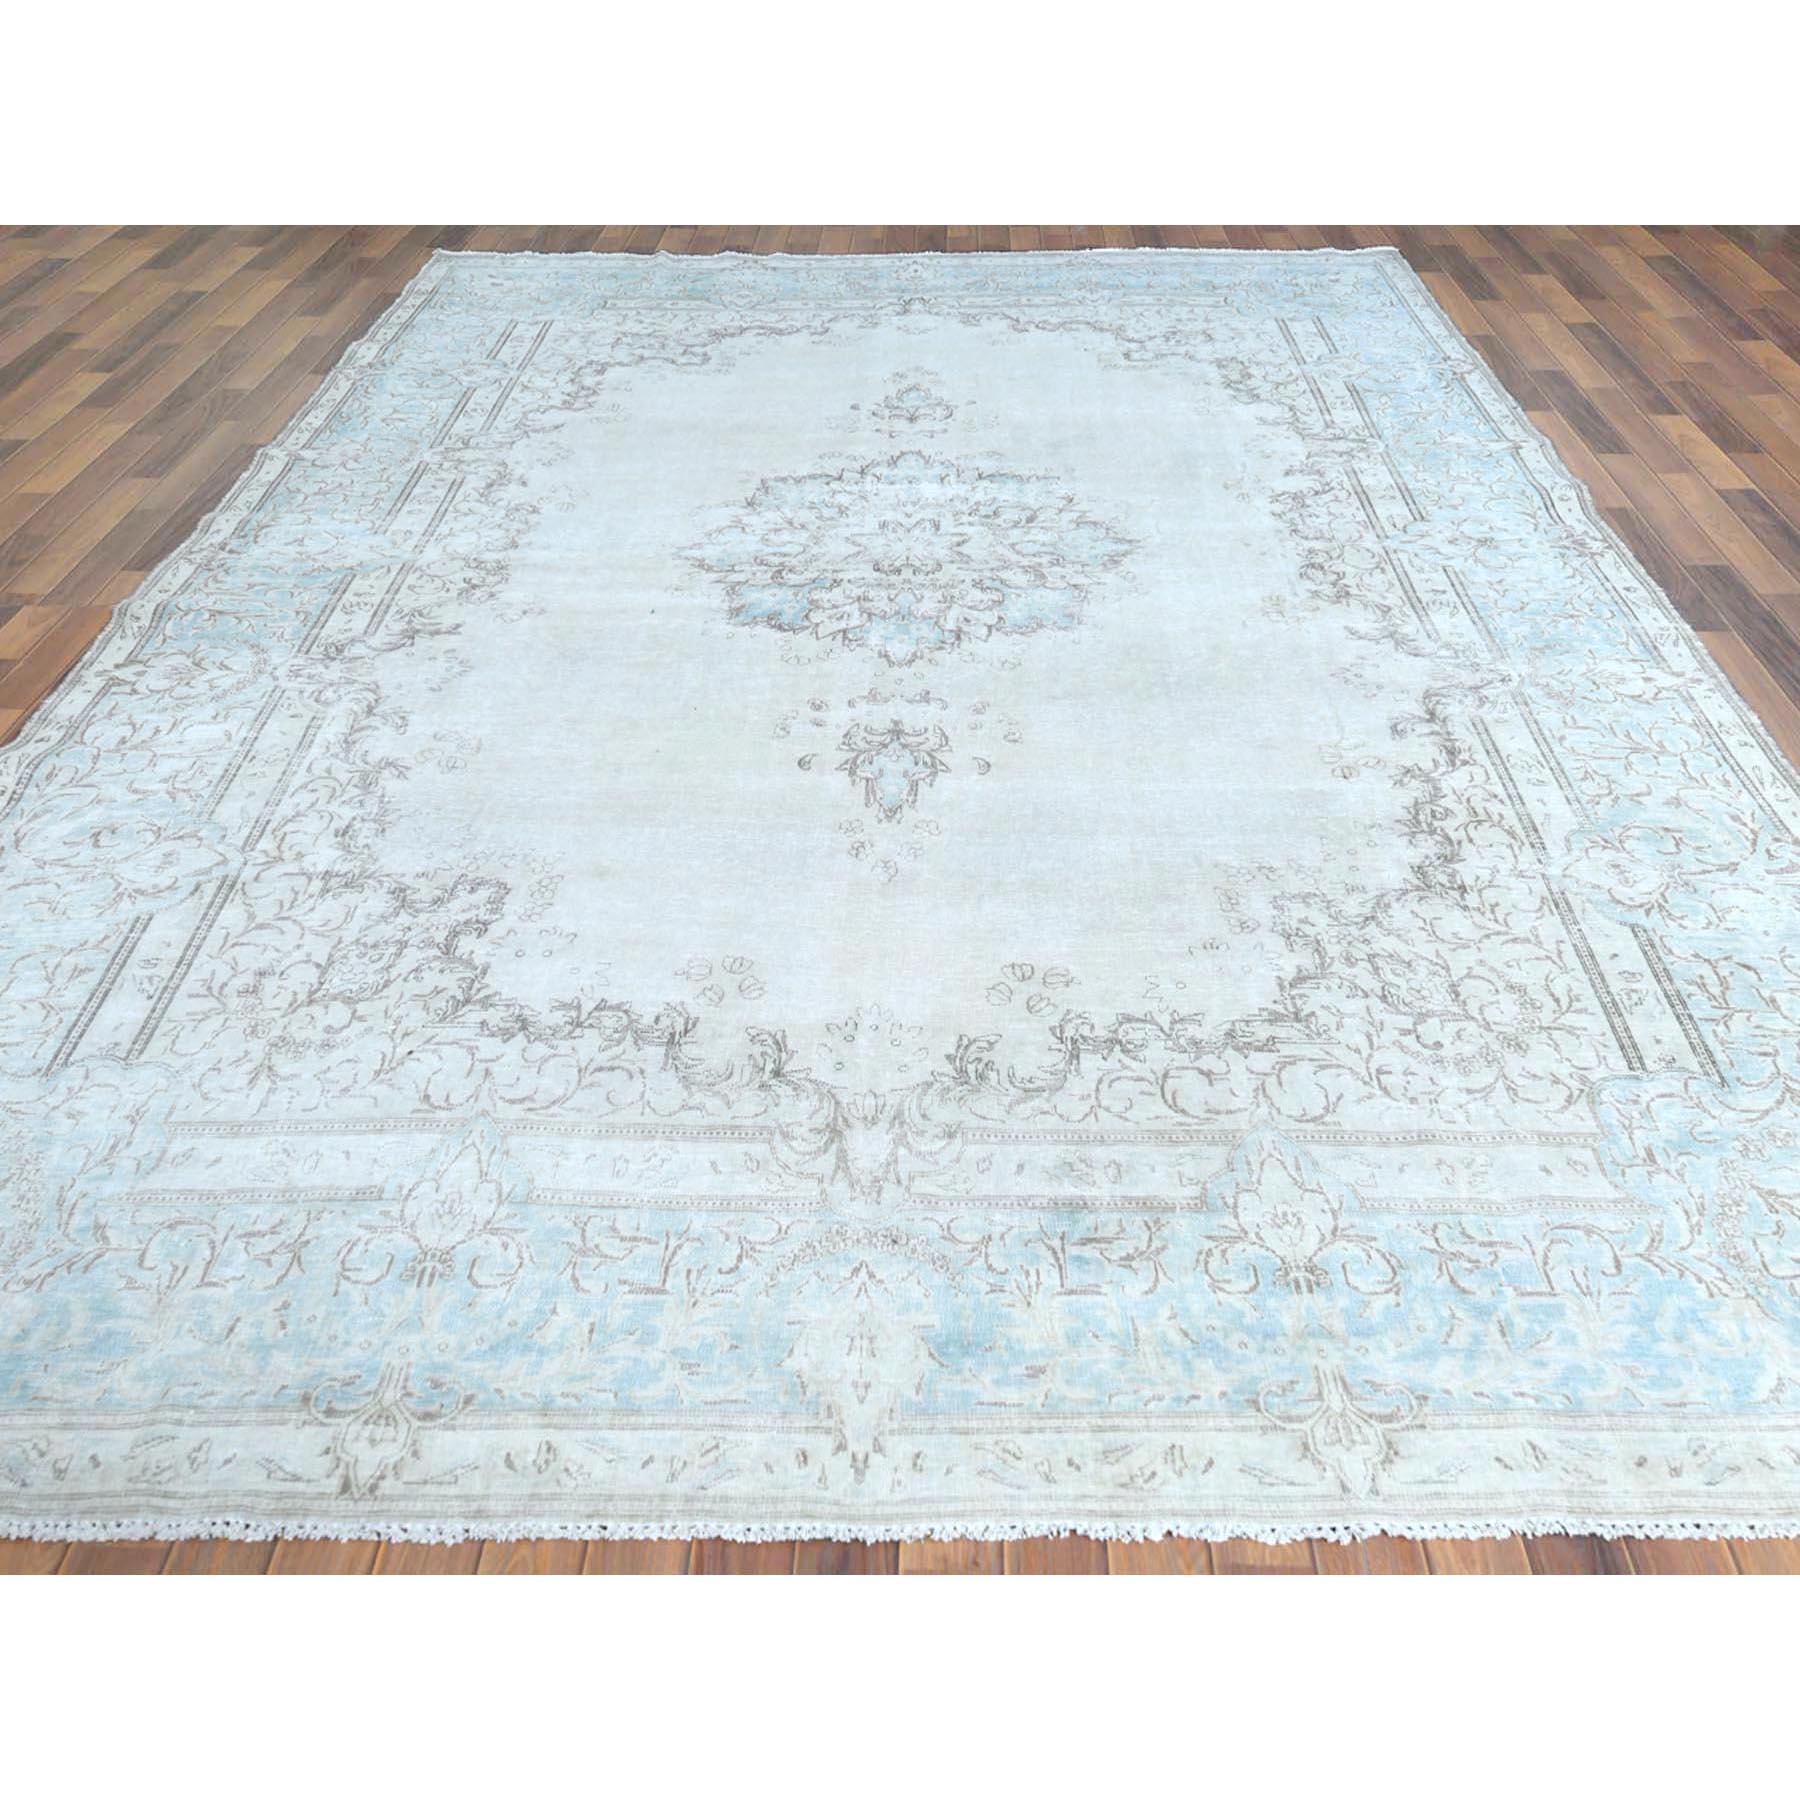 Medieval Vintage Persian Kerman, Distressed Look, Worn Wool, Sheared Low Hand Knotted Rug For Sale